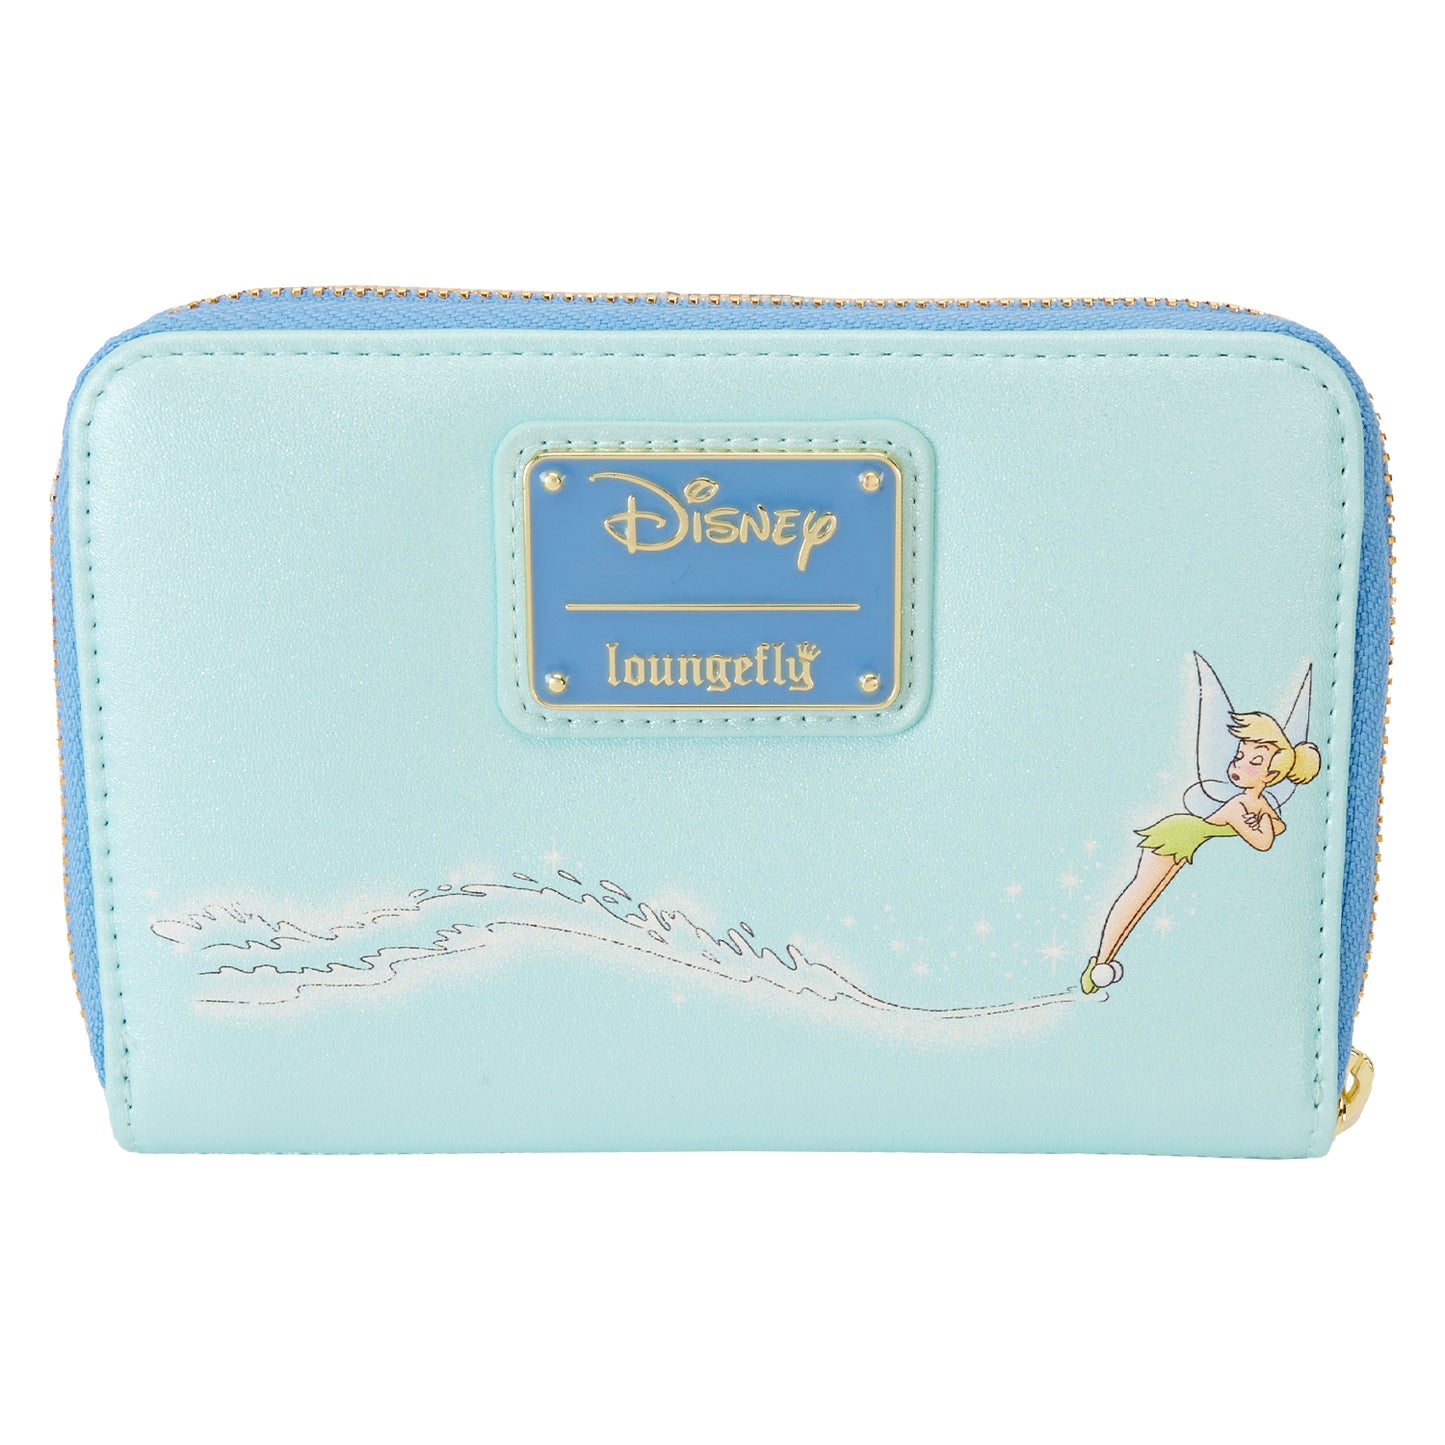 Peter Pan You Can Fly Glow Zip Around Wallet LFY